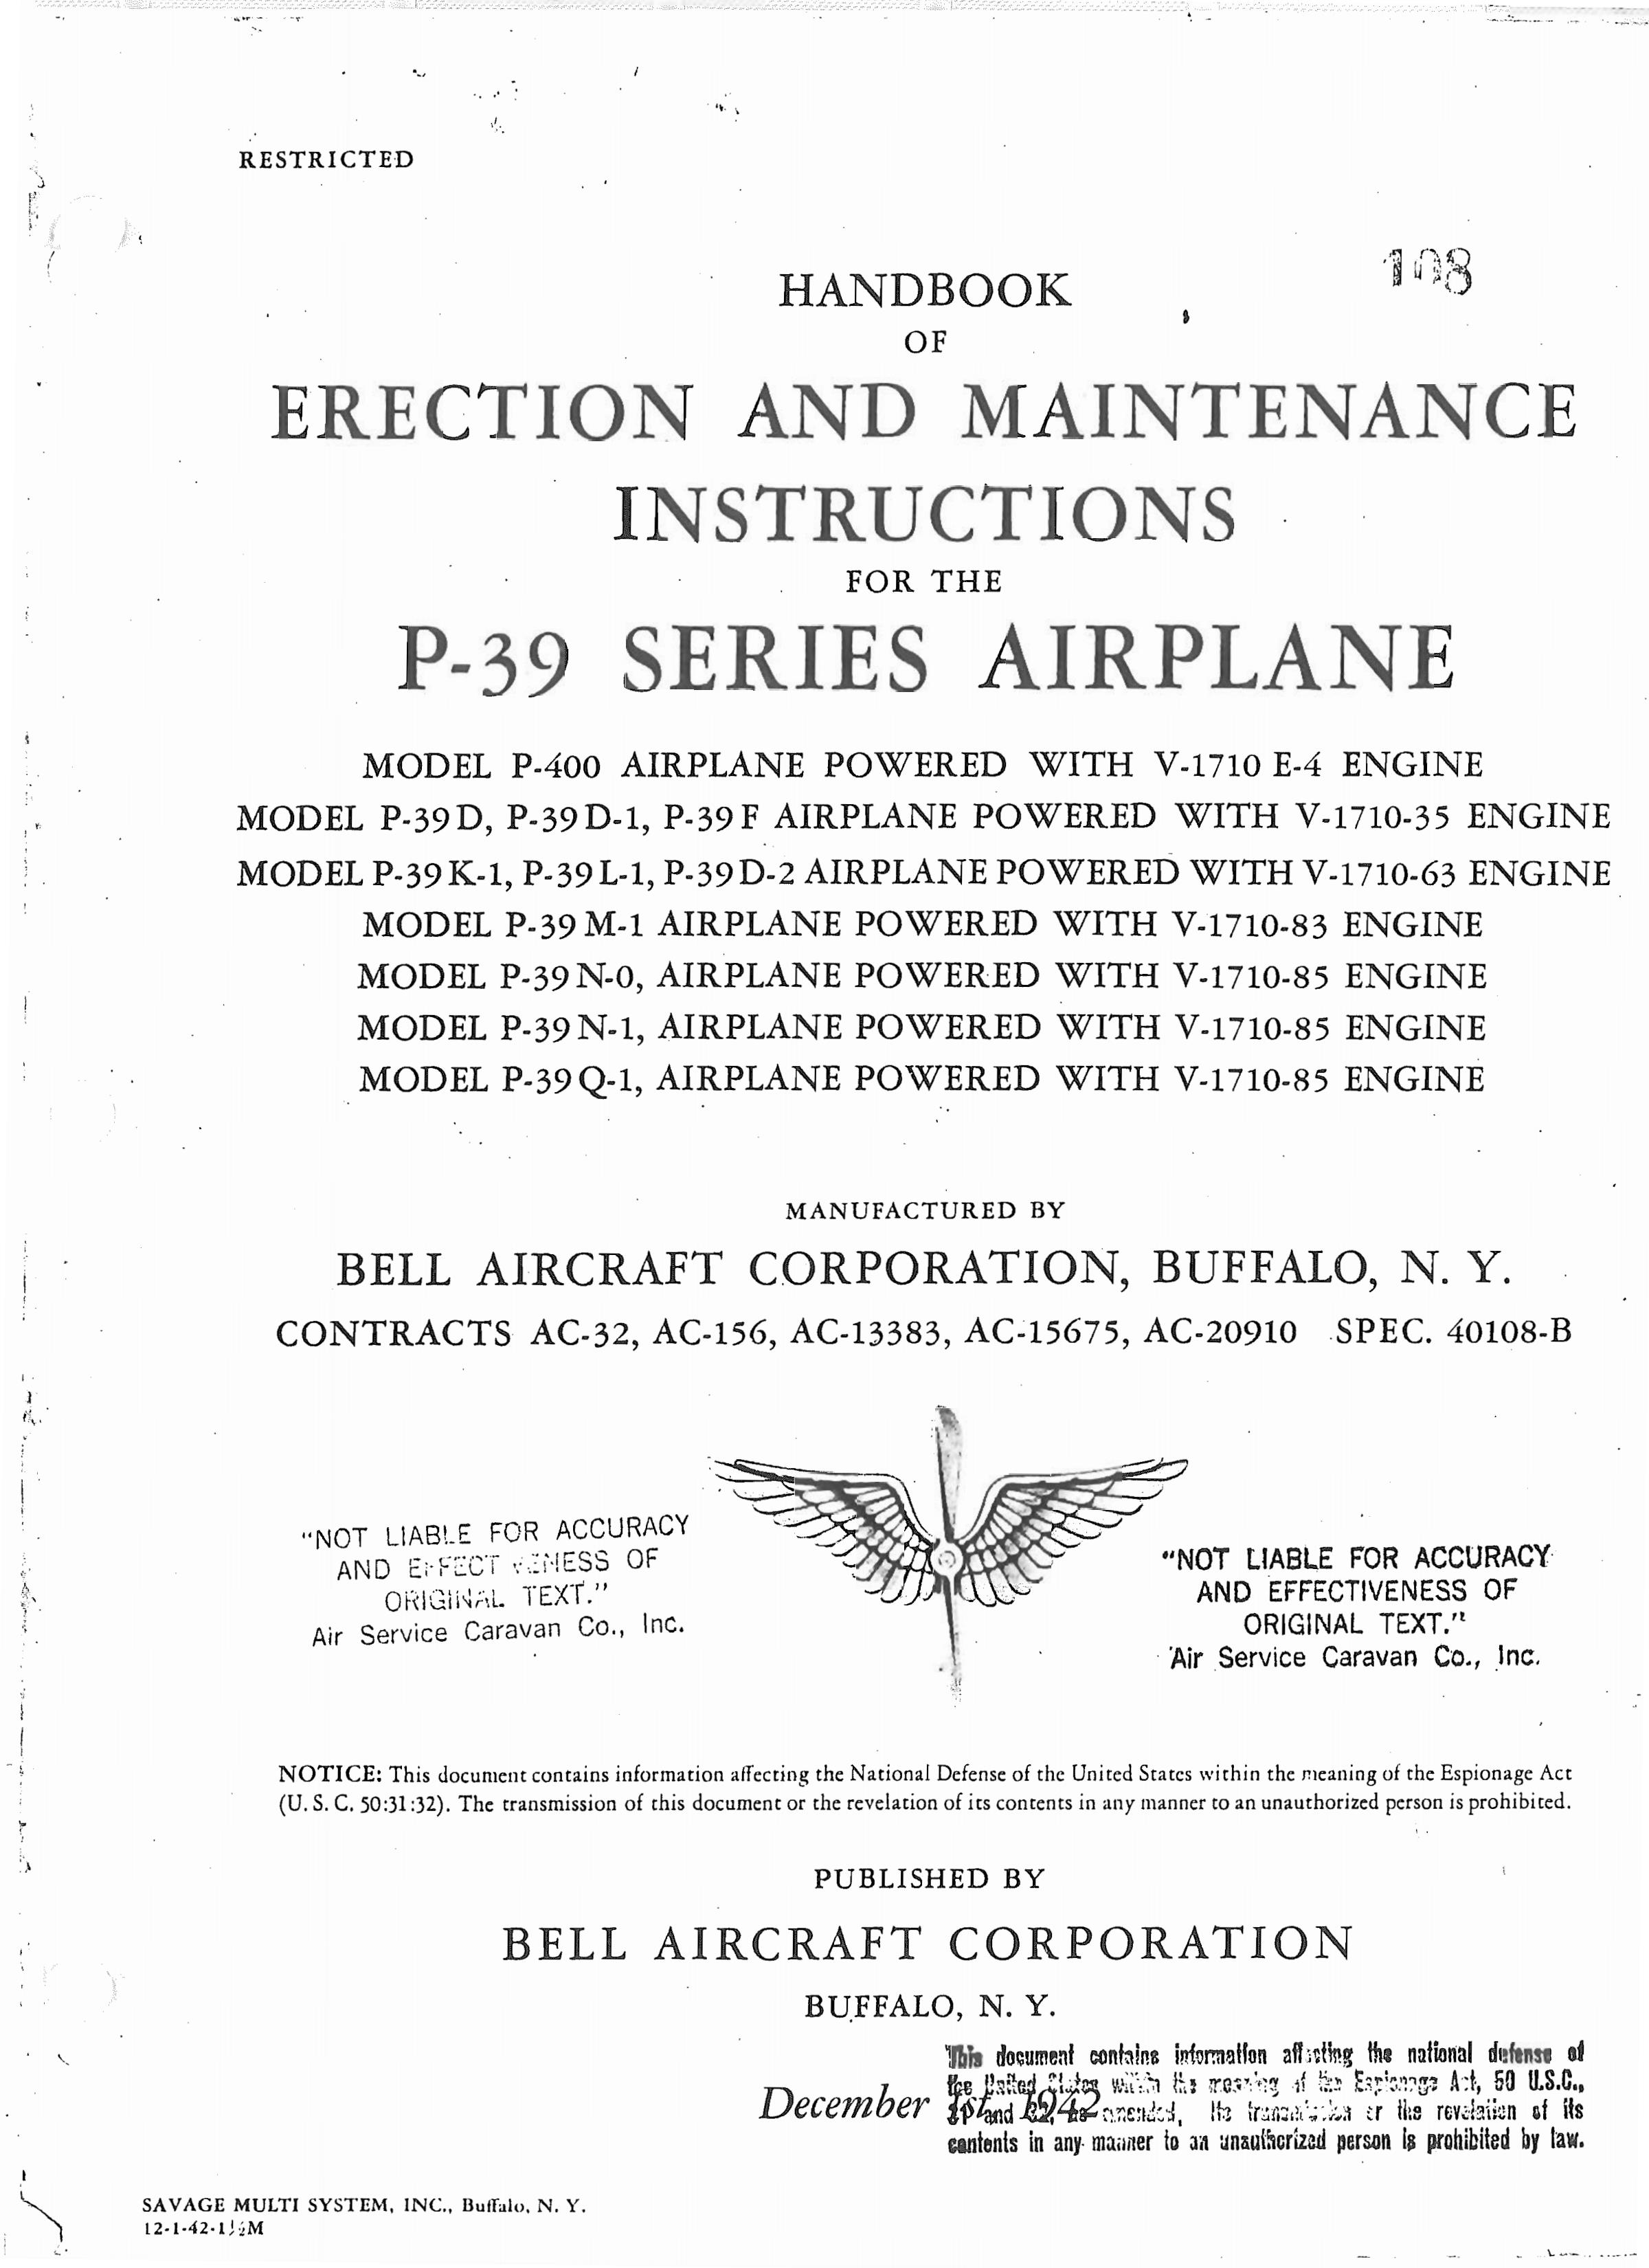 Sample page 4 from AirCorps Library document: Erection and Maintenance Instructions for the P-39 Series